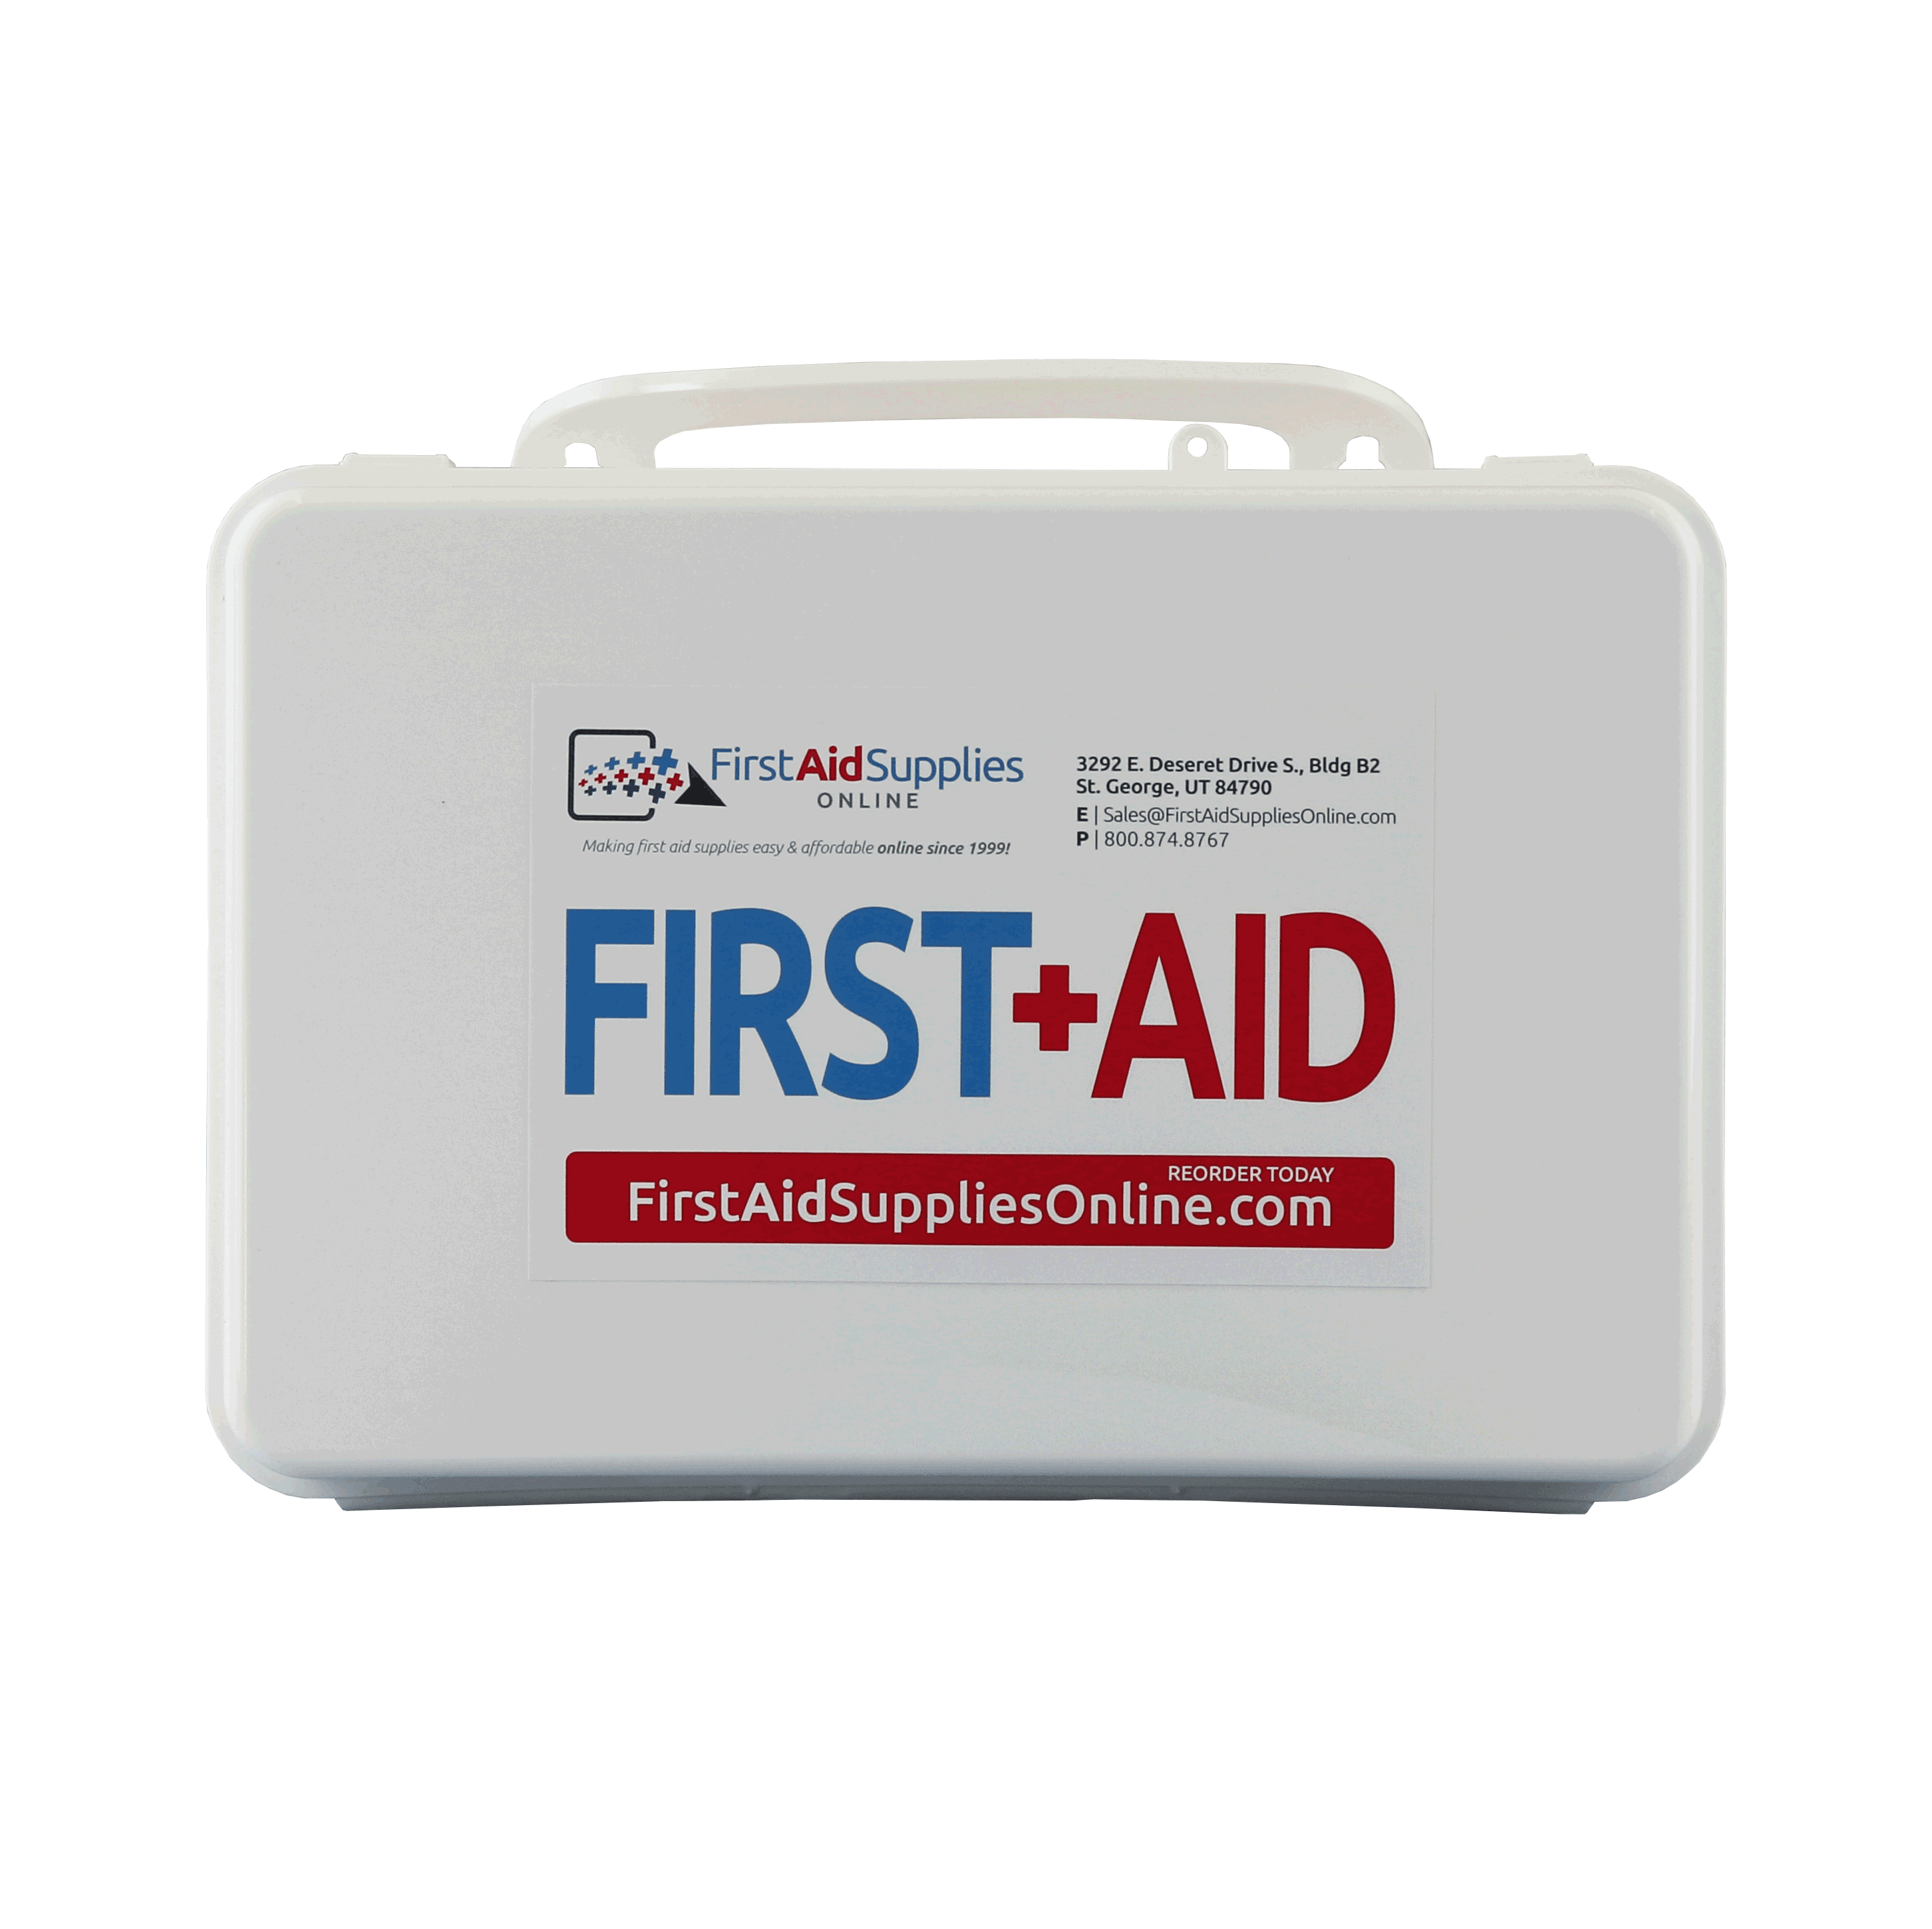 First Aid Only Eyewash Set w/Eyepads and Adhesive Strips